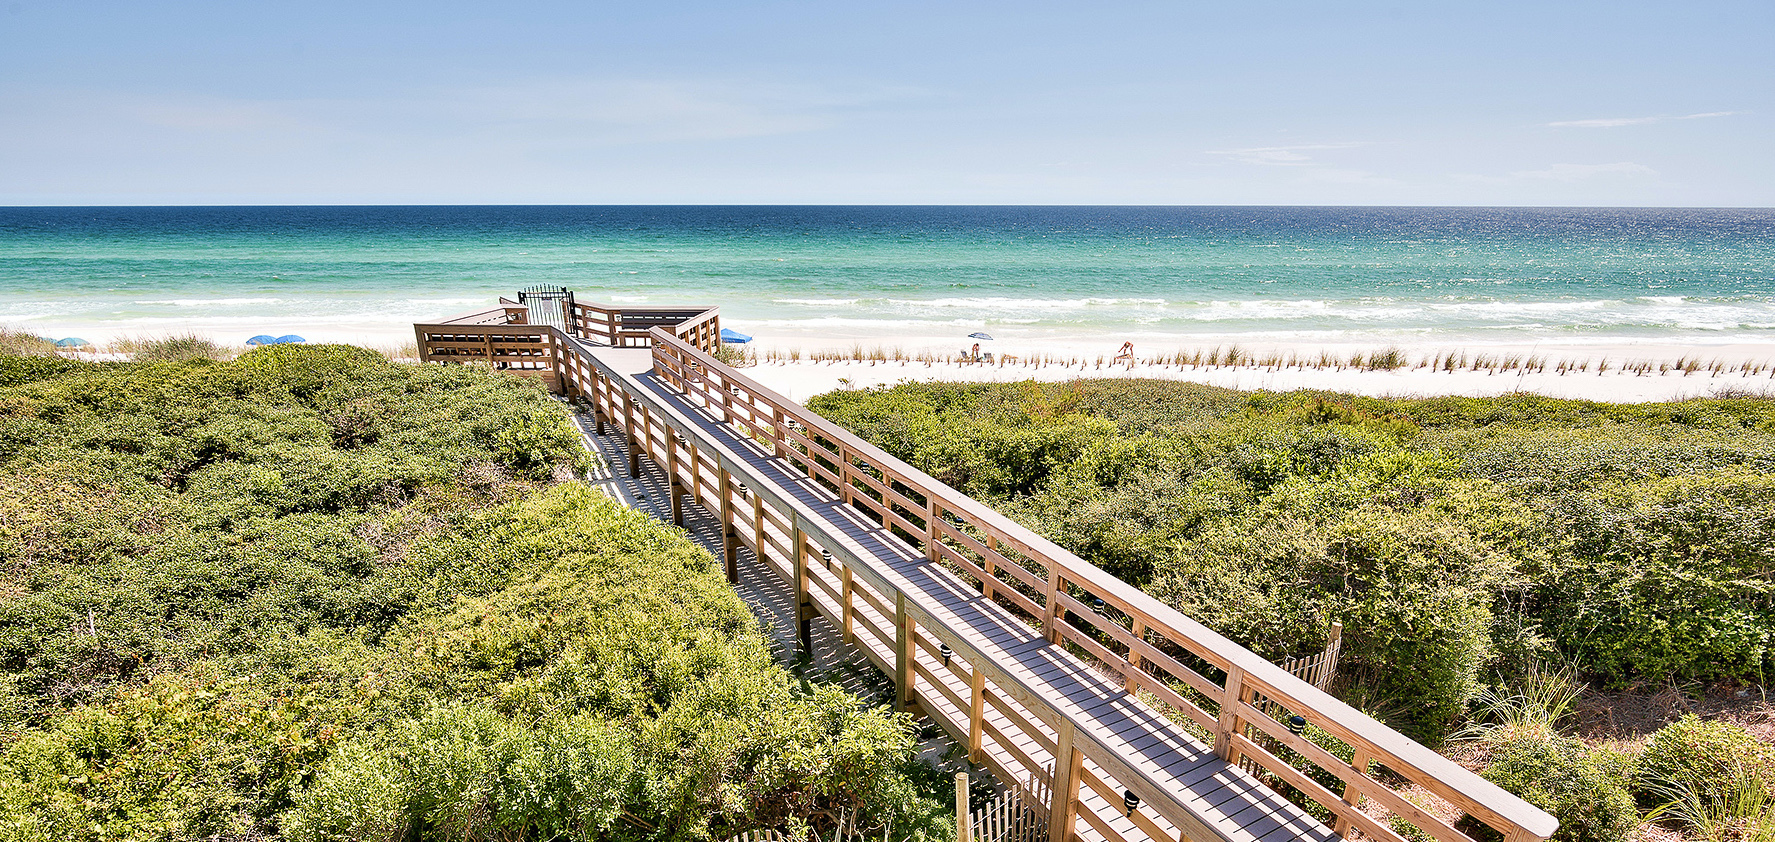 One of Dune Allen's beach access boardwalks surrounded by native vegetation